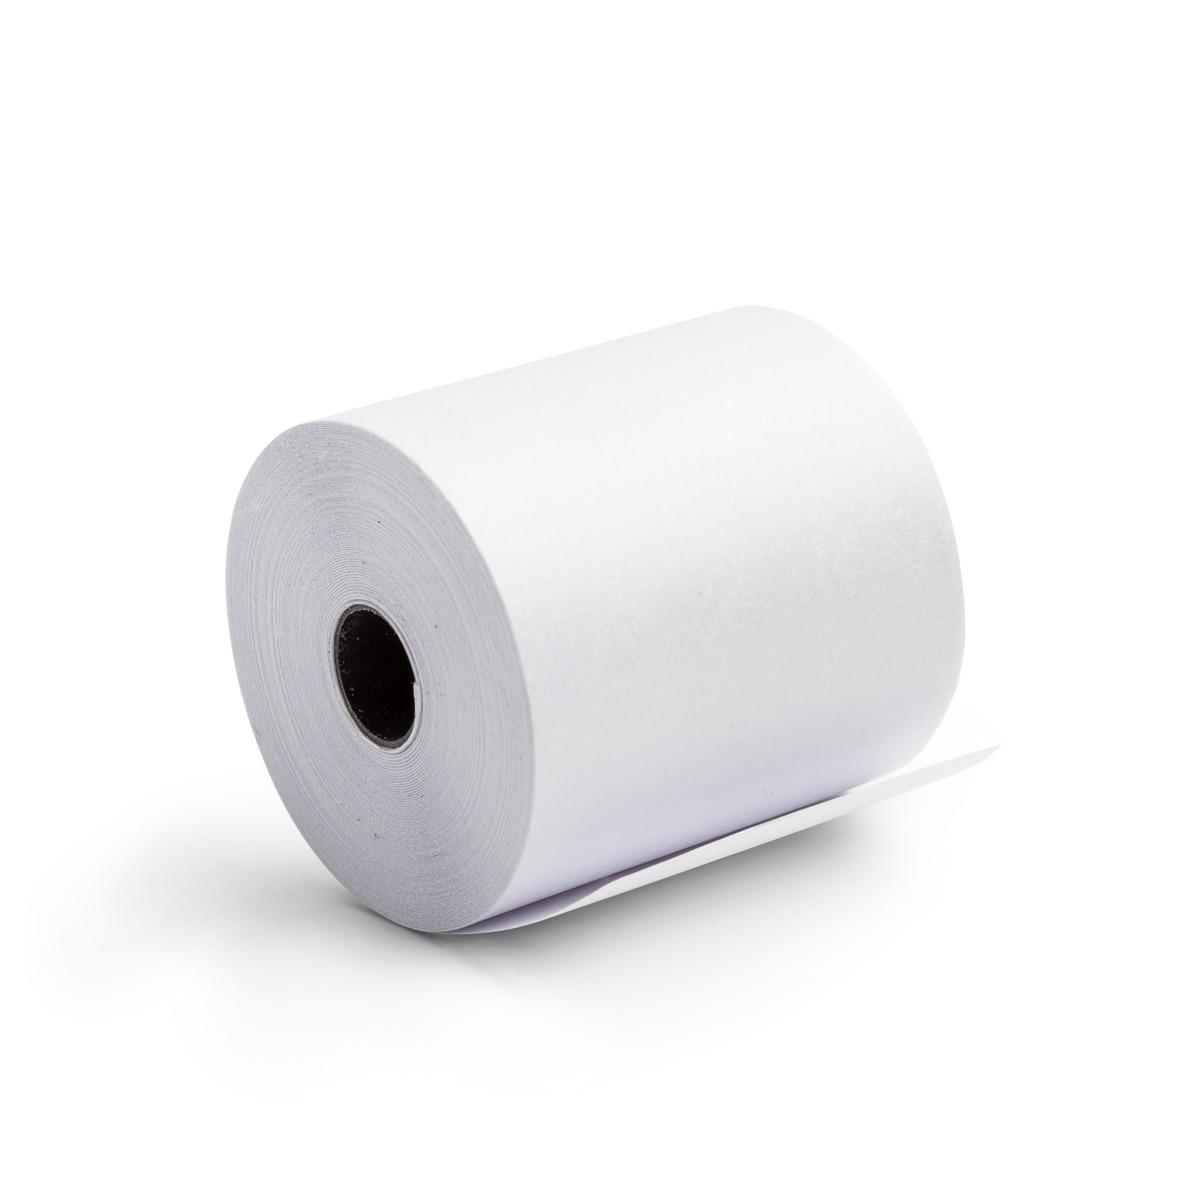 ROLLO PAPEL P/MAQ 80 MM X 30 MTS X 10 TERMICO MAUGER